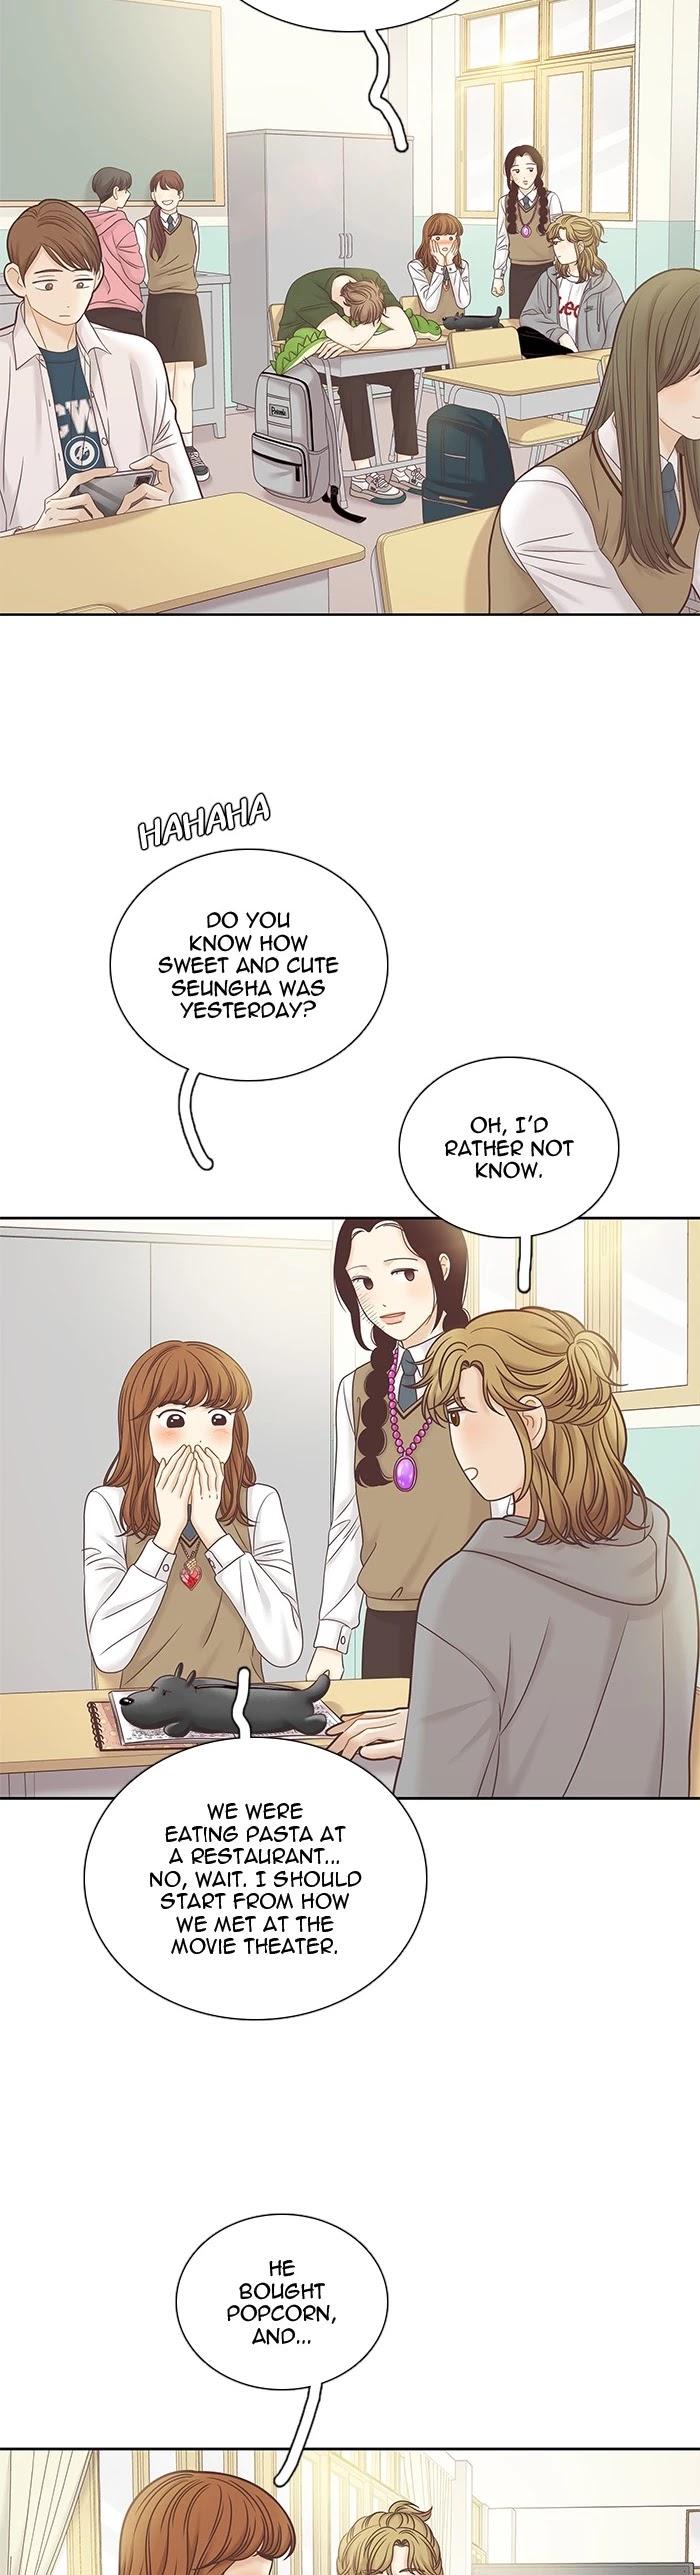 Girl’s World ( World of Girl ) Chapter 282 - Page 11